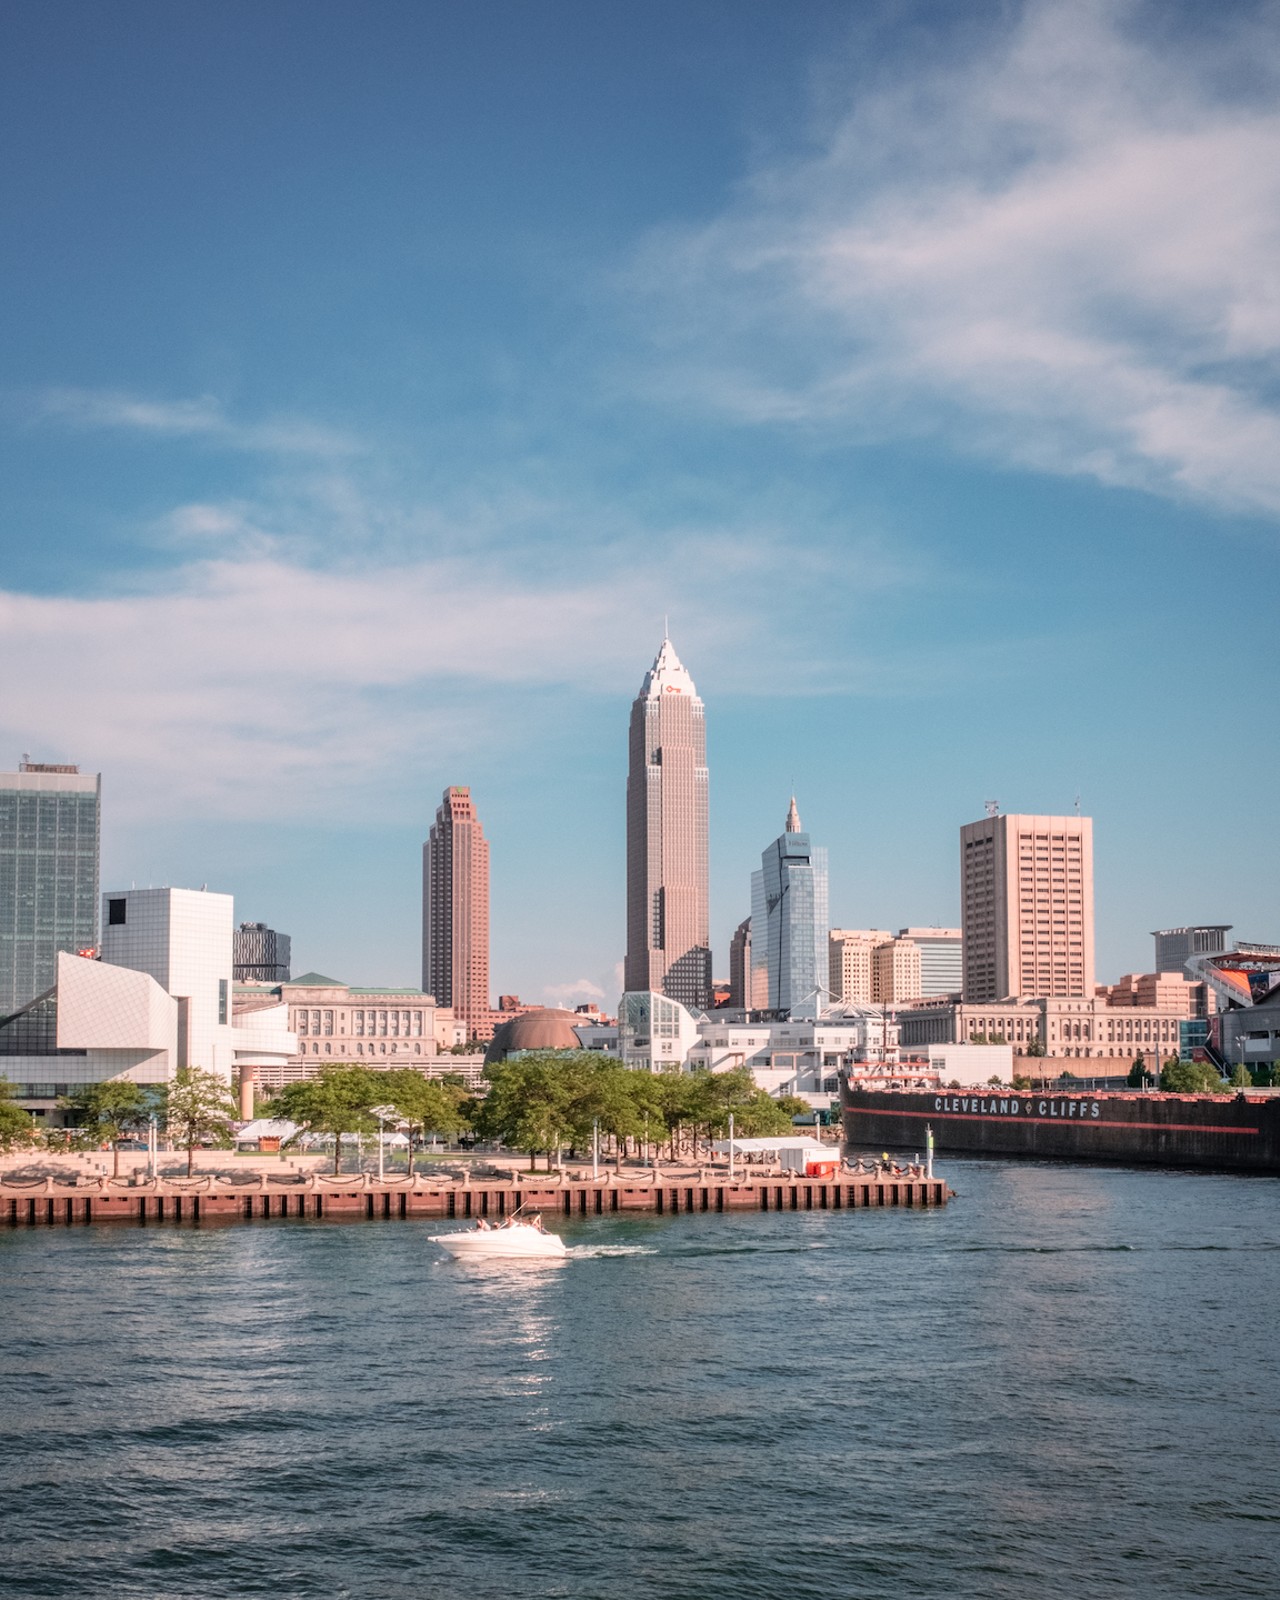 https://media2.clevescene.com/clevescene/imager/the-15-best-places-to-shoot-the-cleveland-skyline-according-to-a-local-photographer/u/zoom/42525074/lake-erie.jpg?cb=1691606955